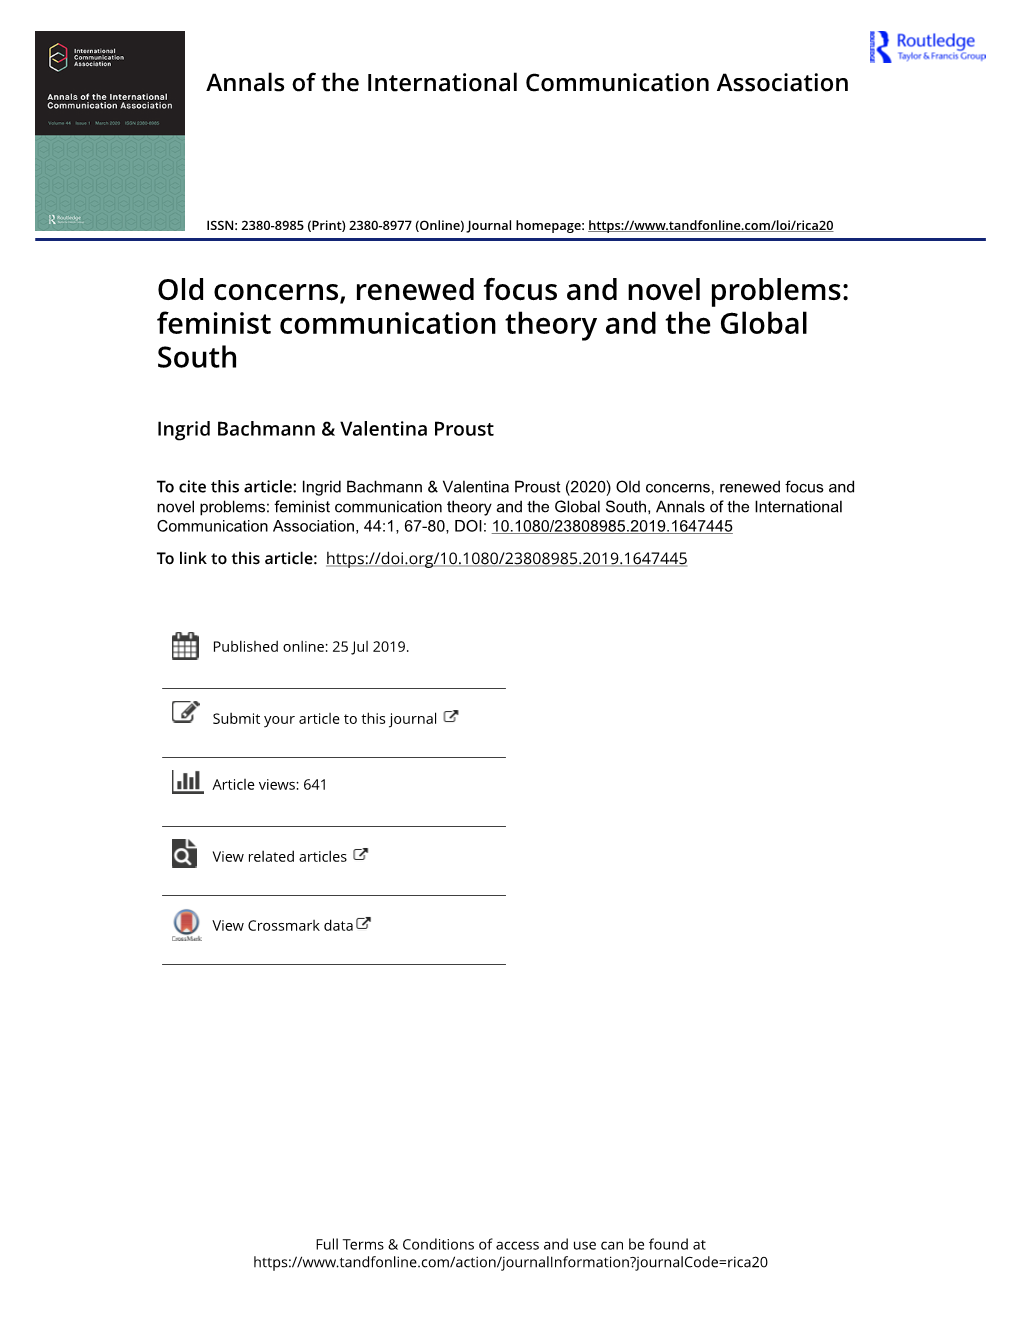 Old Concerns, Renewed Focus and Novel Problems: Feminist Communication Theory and the Global South